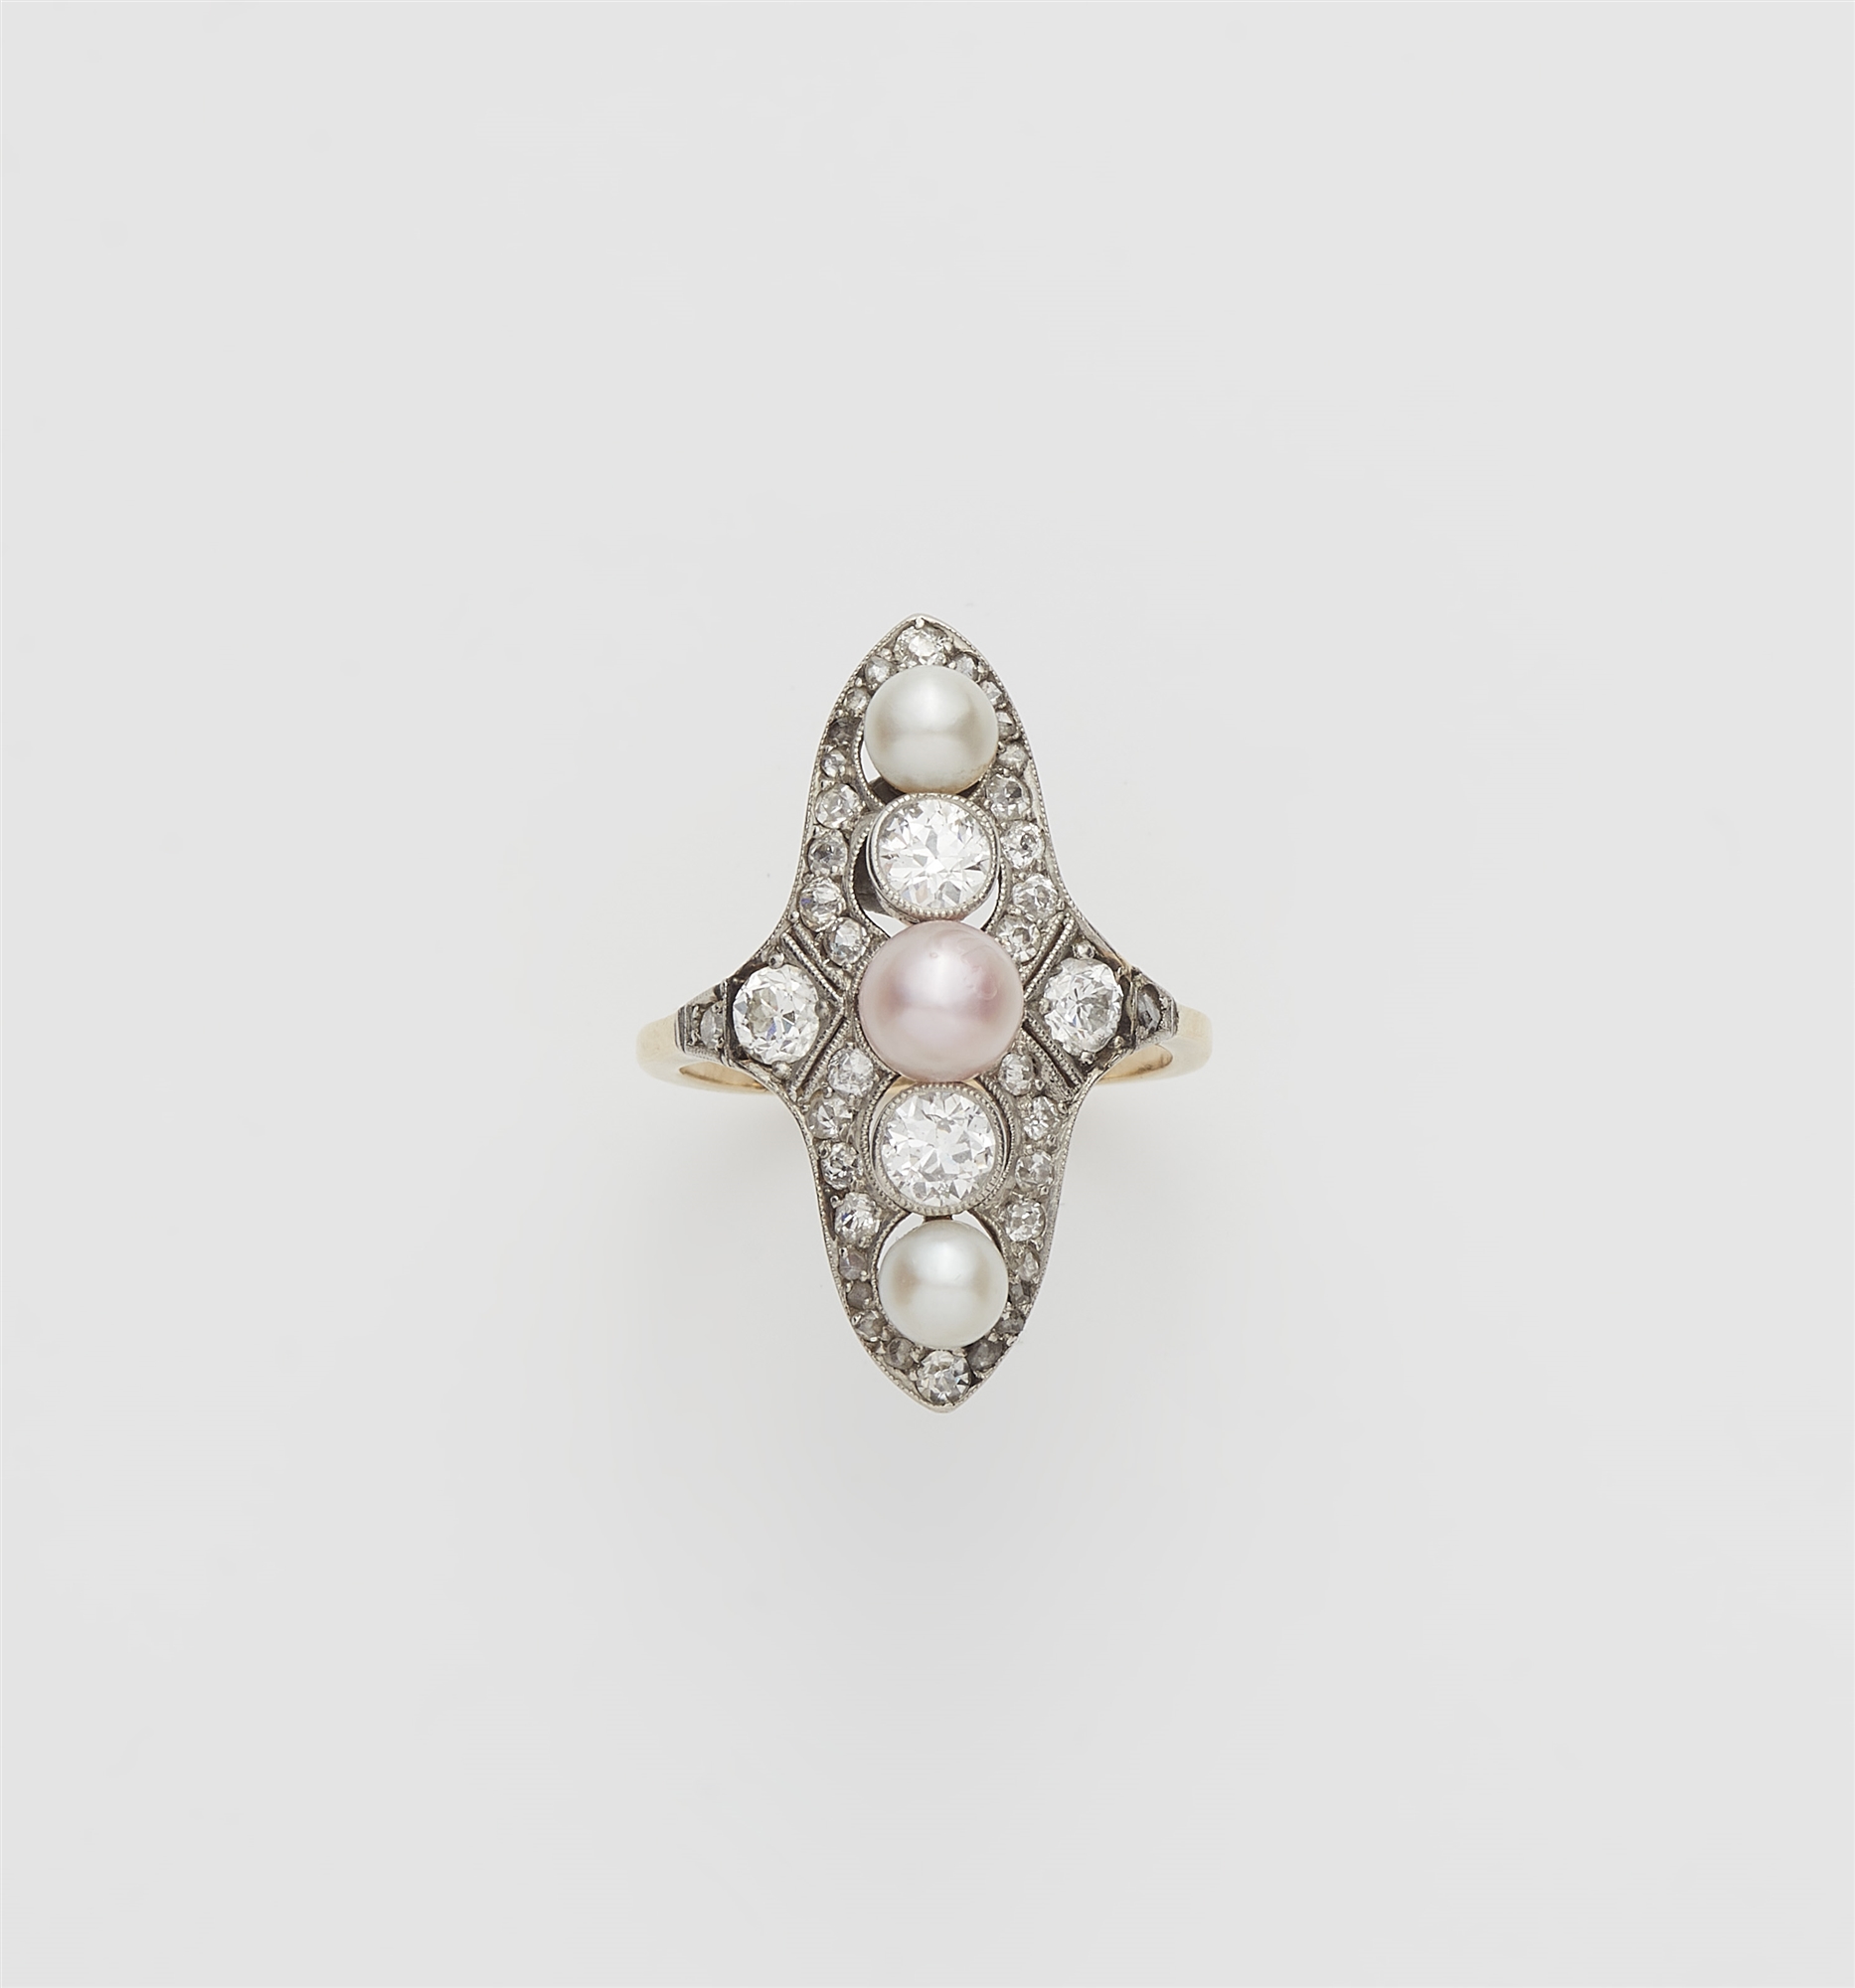 An Art Déco 14k gold platinum diamond and pearl Marquise ring.